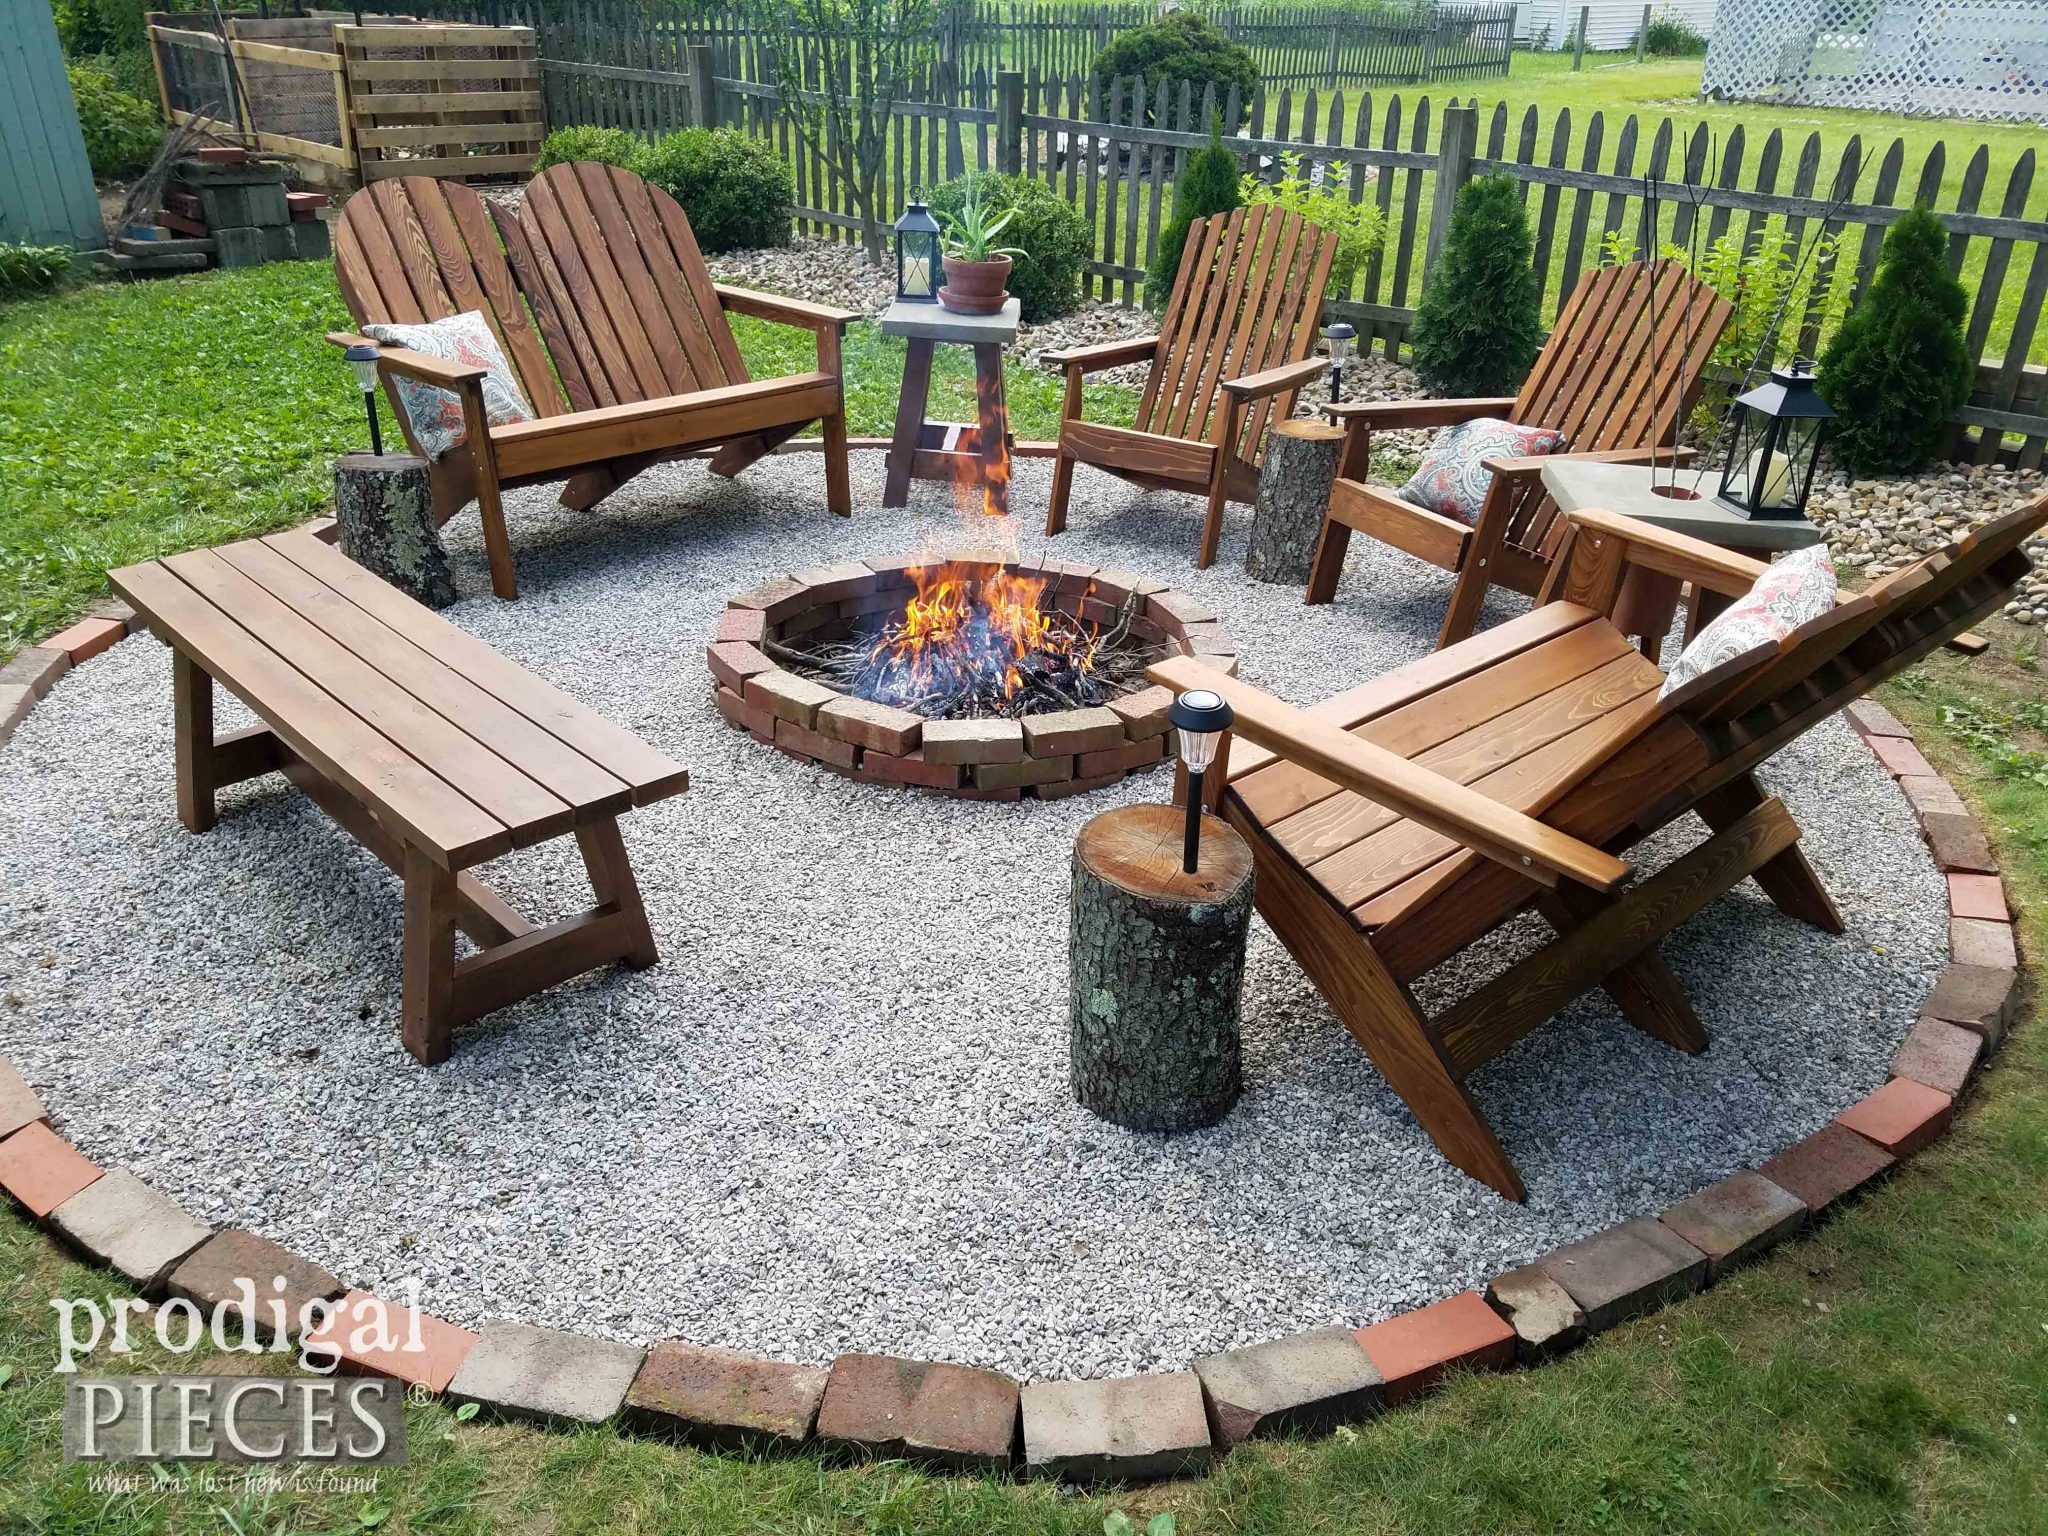 Enjoy your days at home around a new backyard firepit